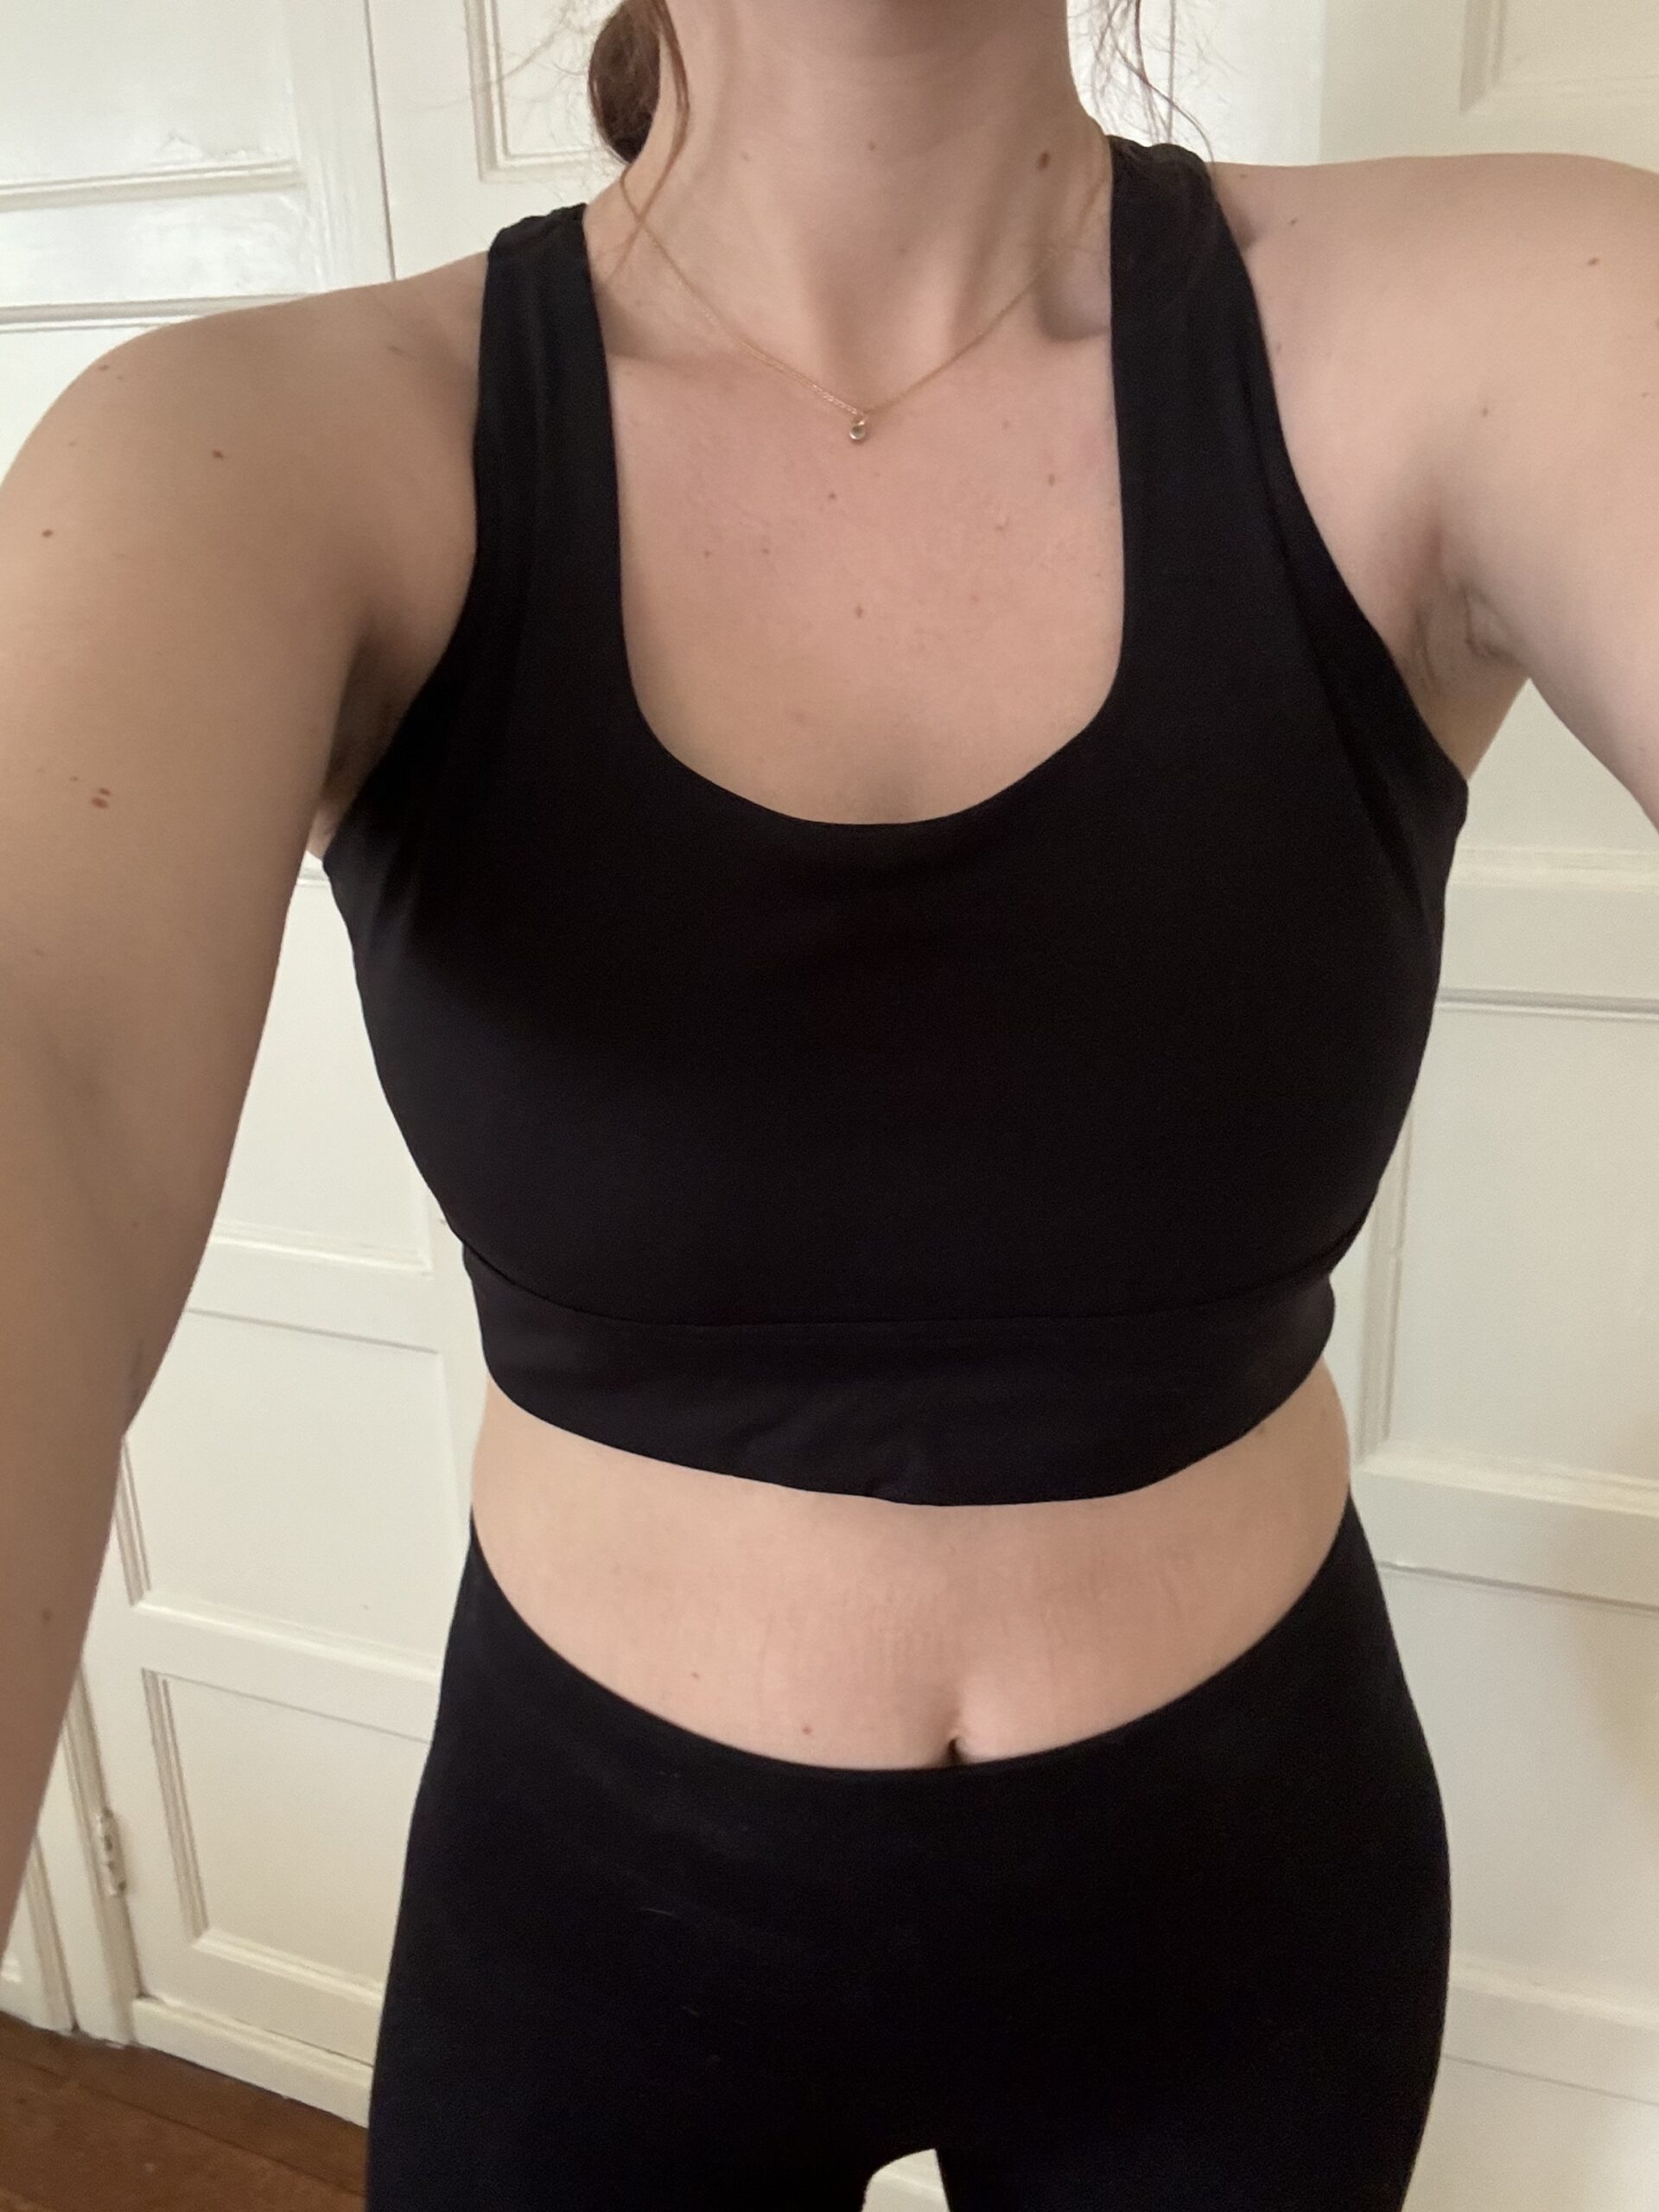 Woman wearing a black sports bra and leggings, close-up on torso.